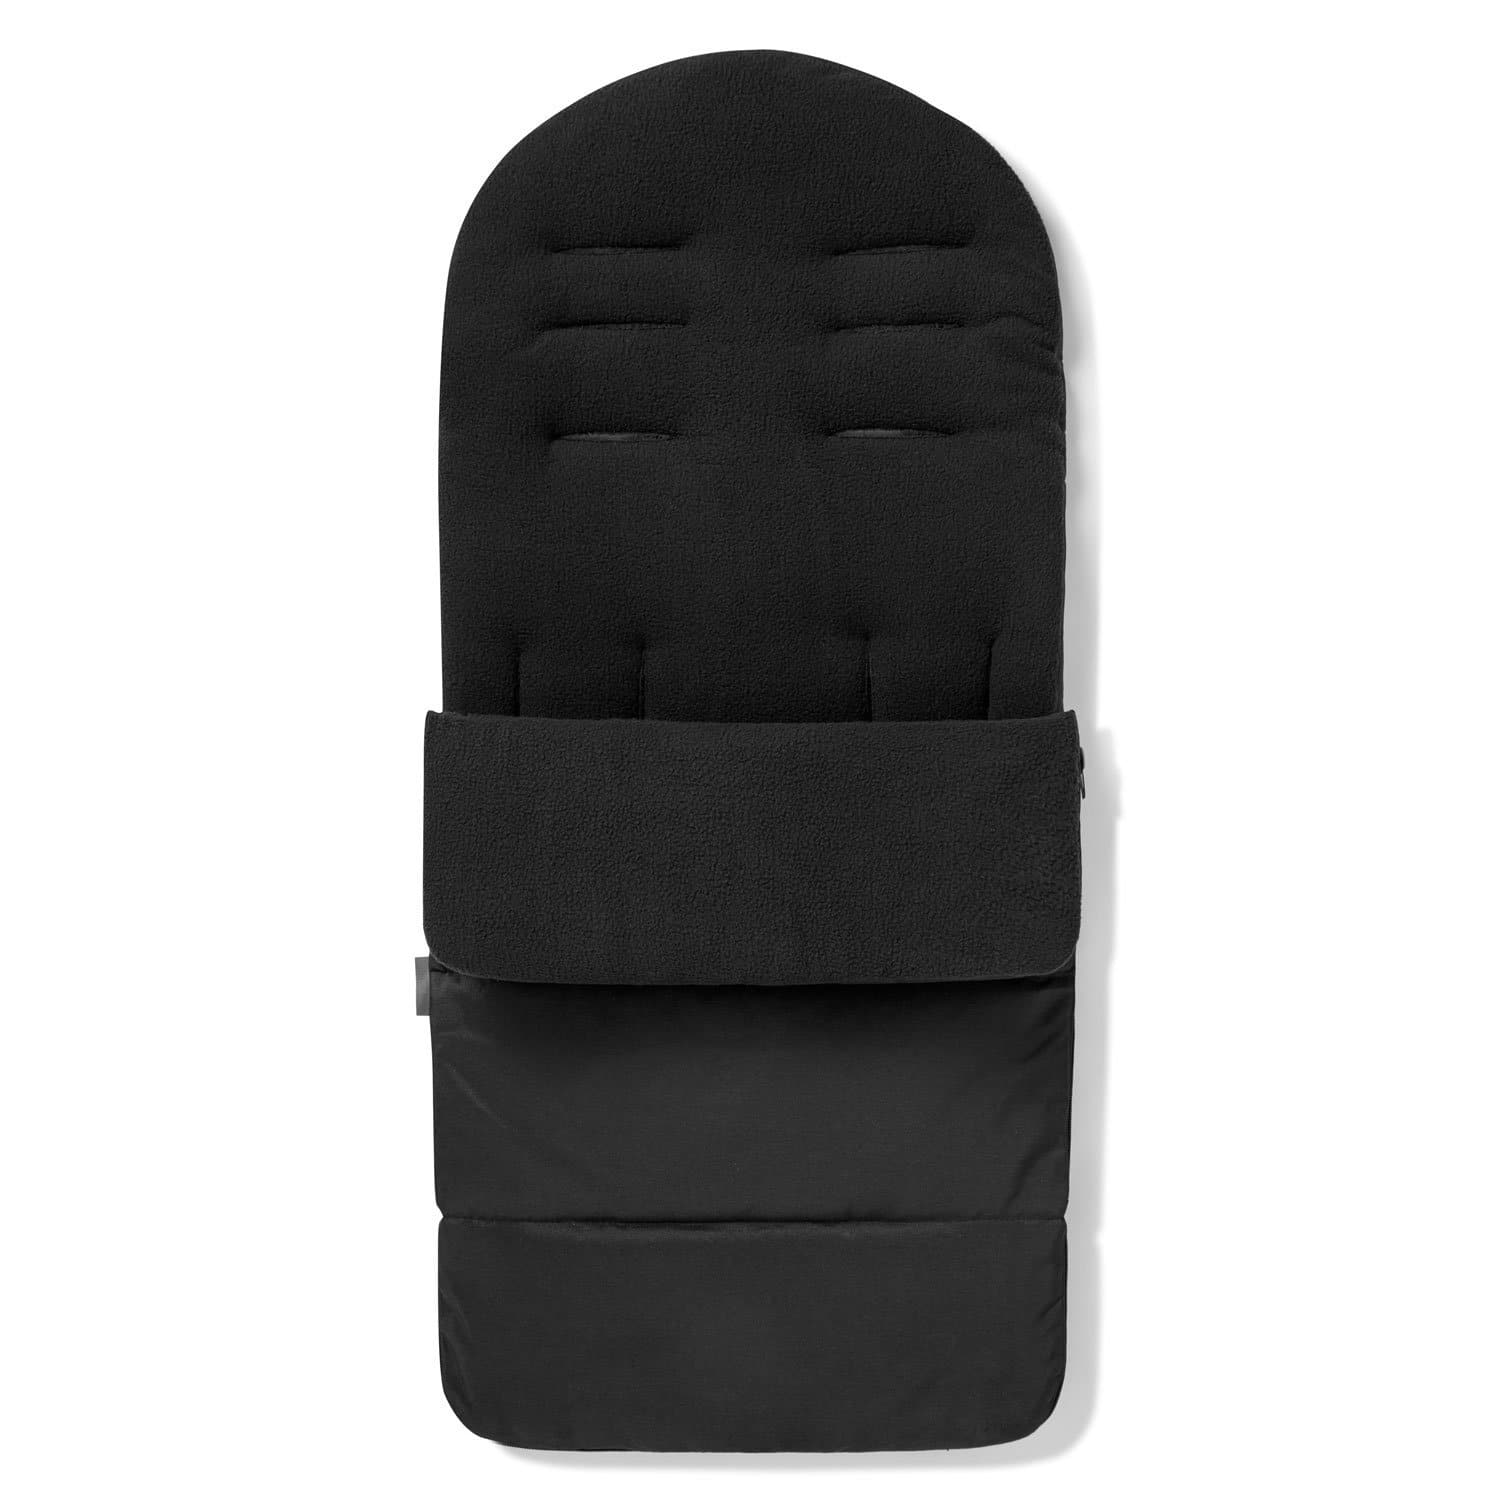 Premium Footmuff / Cosy Toes Compatible with Nania - Black Jack / Fits All Models | For Your Little One